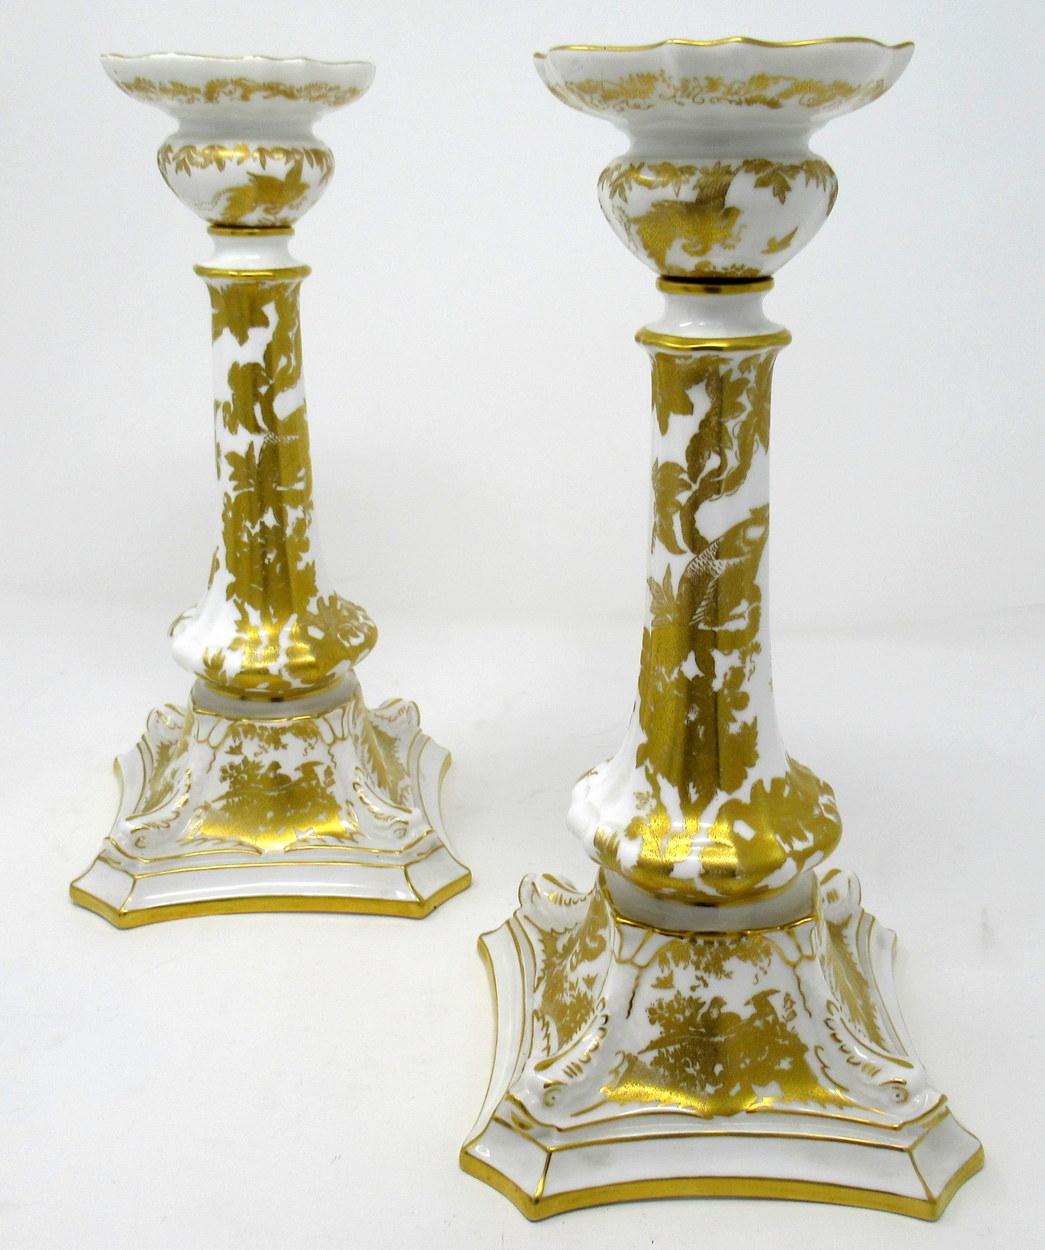 Superb pair of highly ornate Royal Crown Derby gold Aves pattern porcelain and gilt single light table or mantlepiece candlesticks of good size proportions, mid-20th century, 

Each of tall slender form with lavish raised gilt decoration depicting